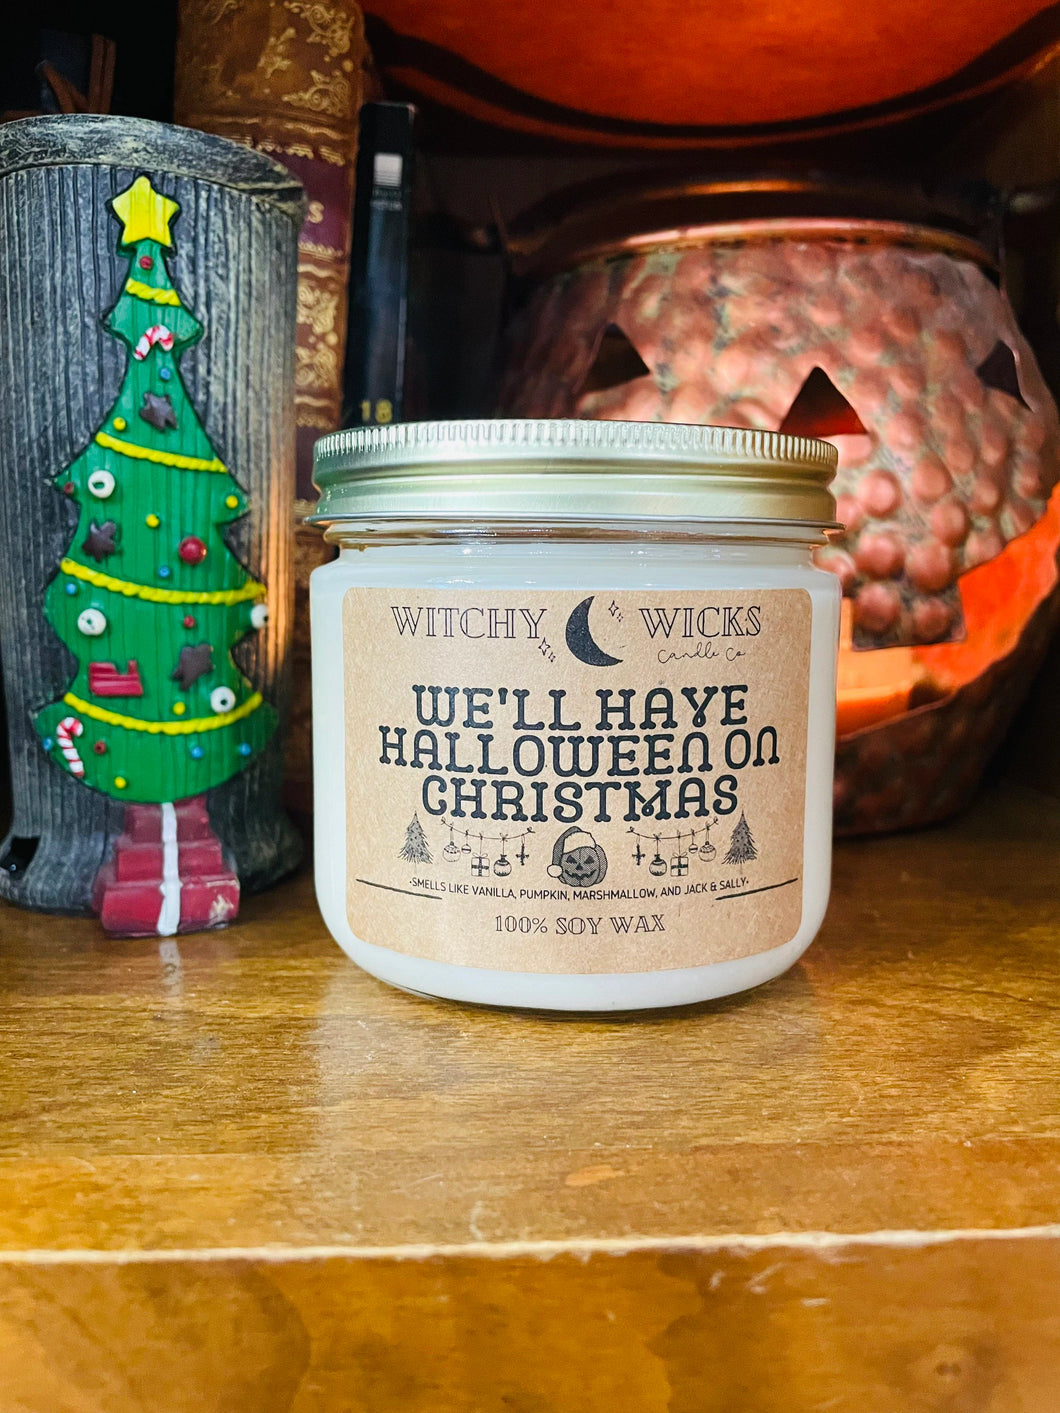 We’ll have Halloween on Christmas 100% Soy Wax Candle